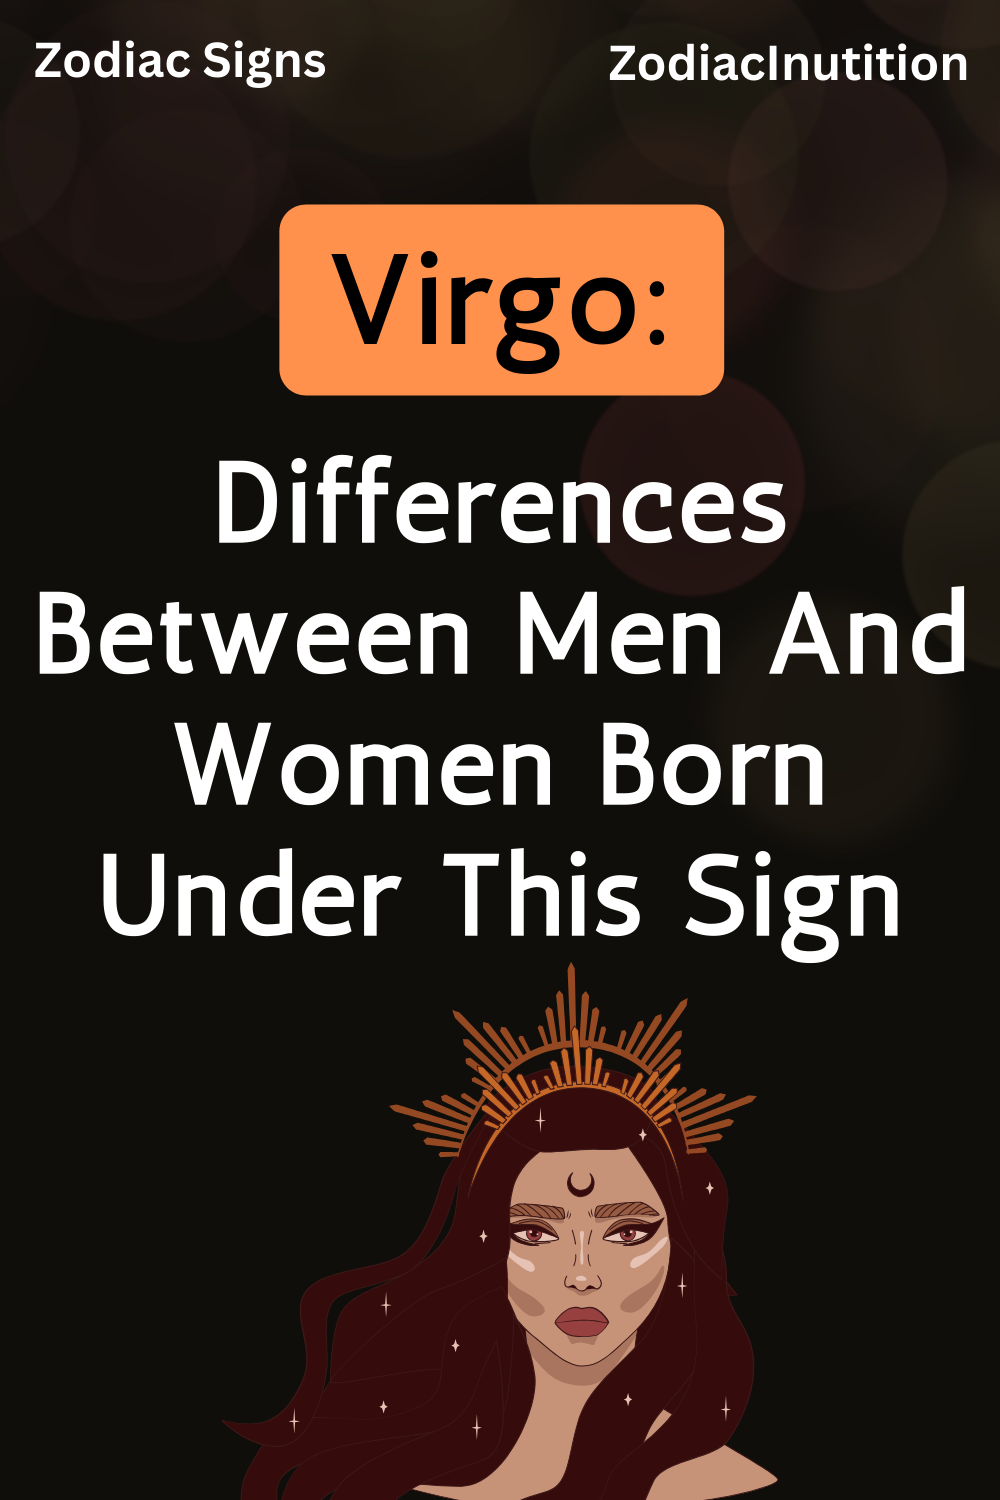 Virgo: Differences Between Men And Women Born Under This Sign